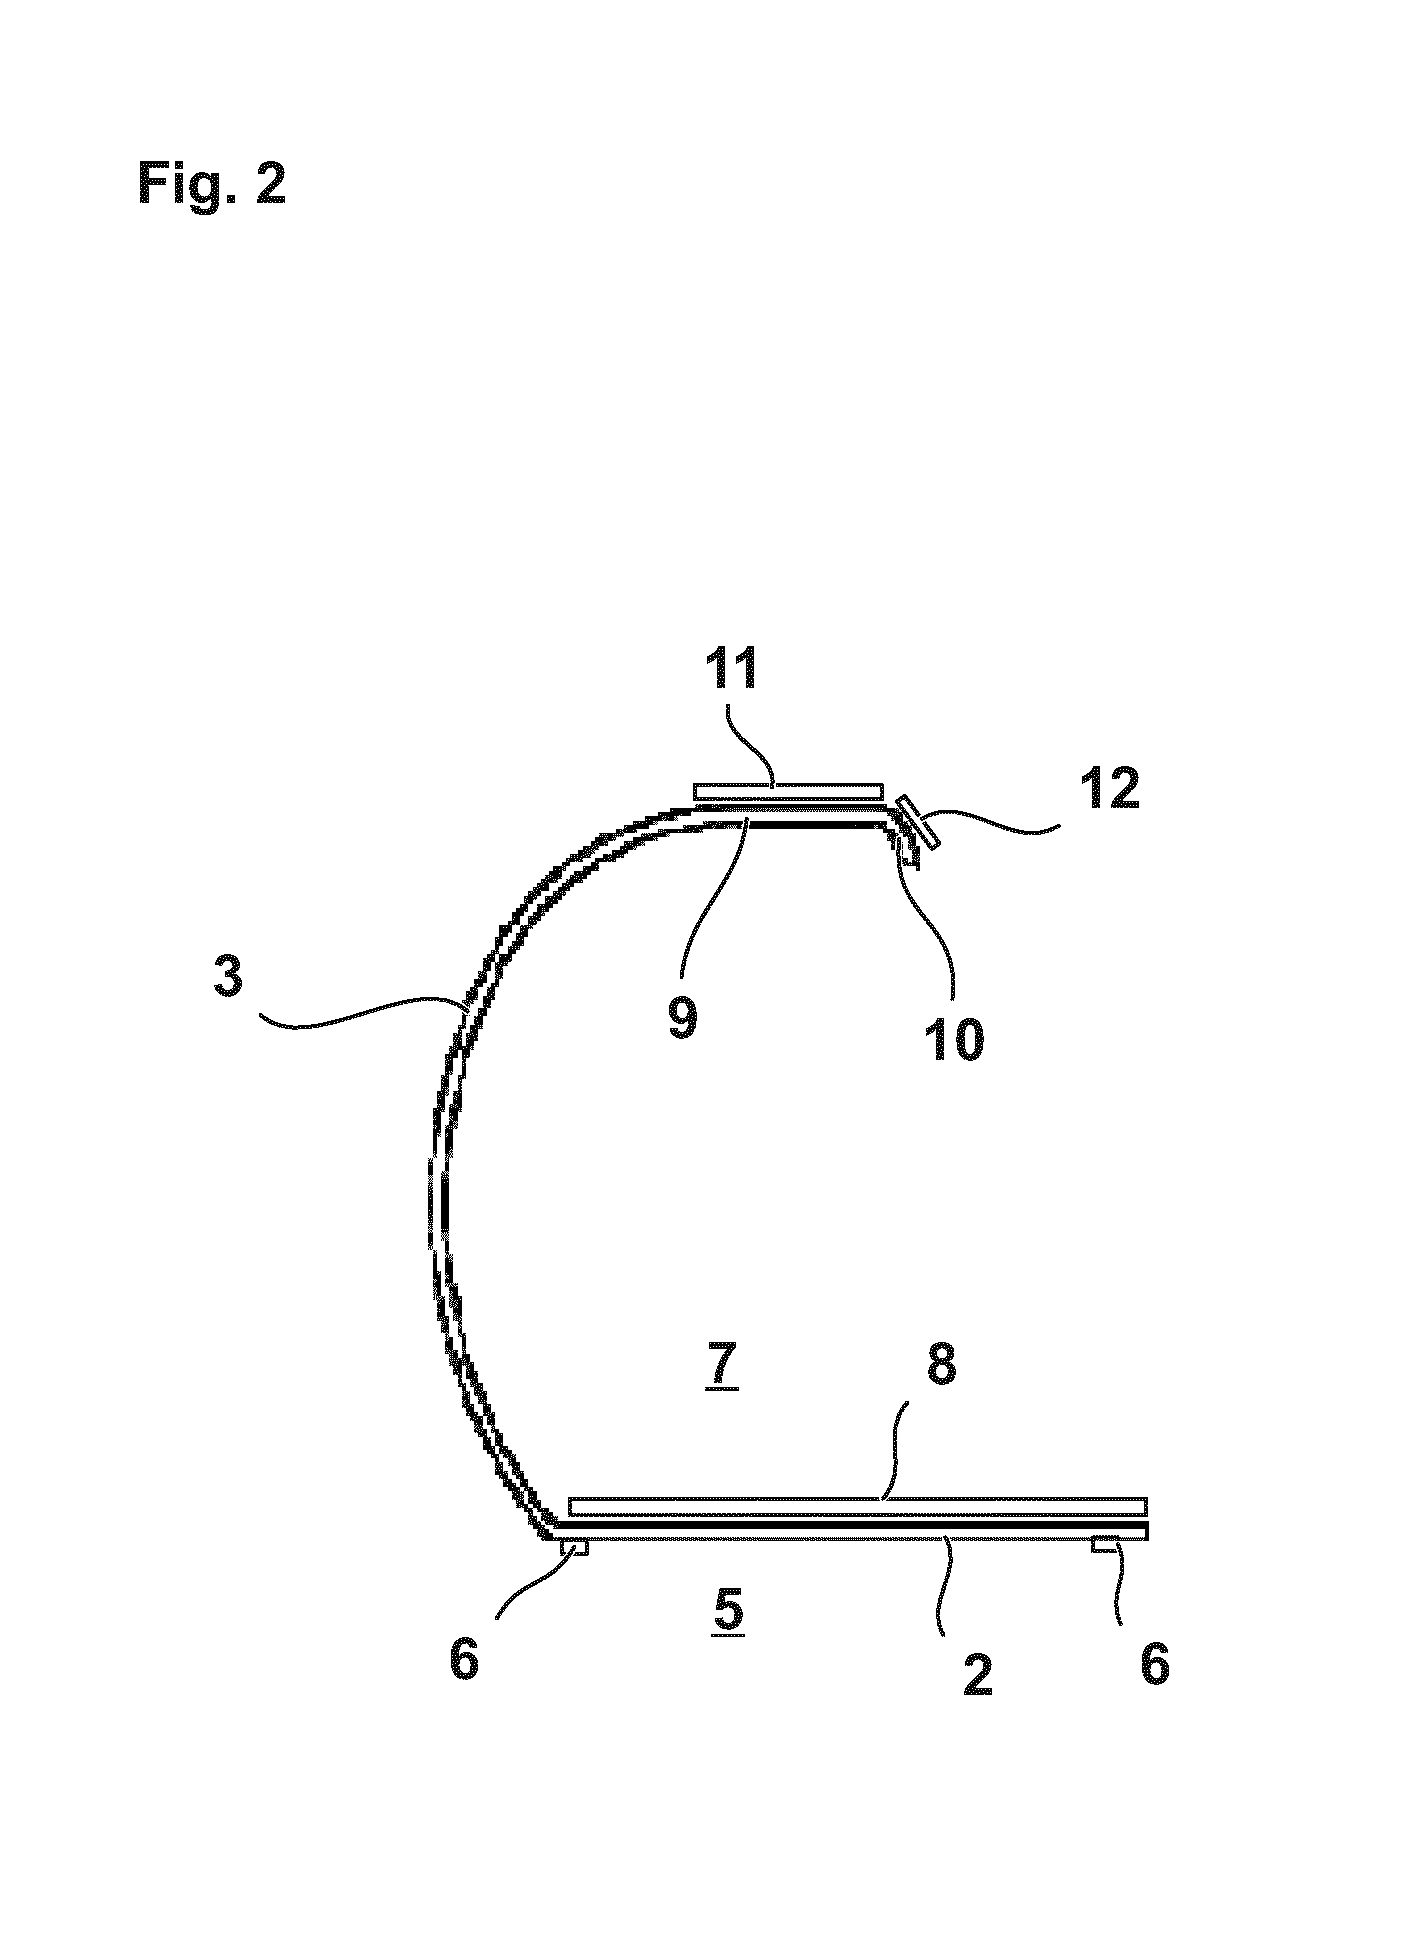 Device for holding a sheet of paper, a holder for a mobile device and software program for use with such holder